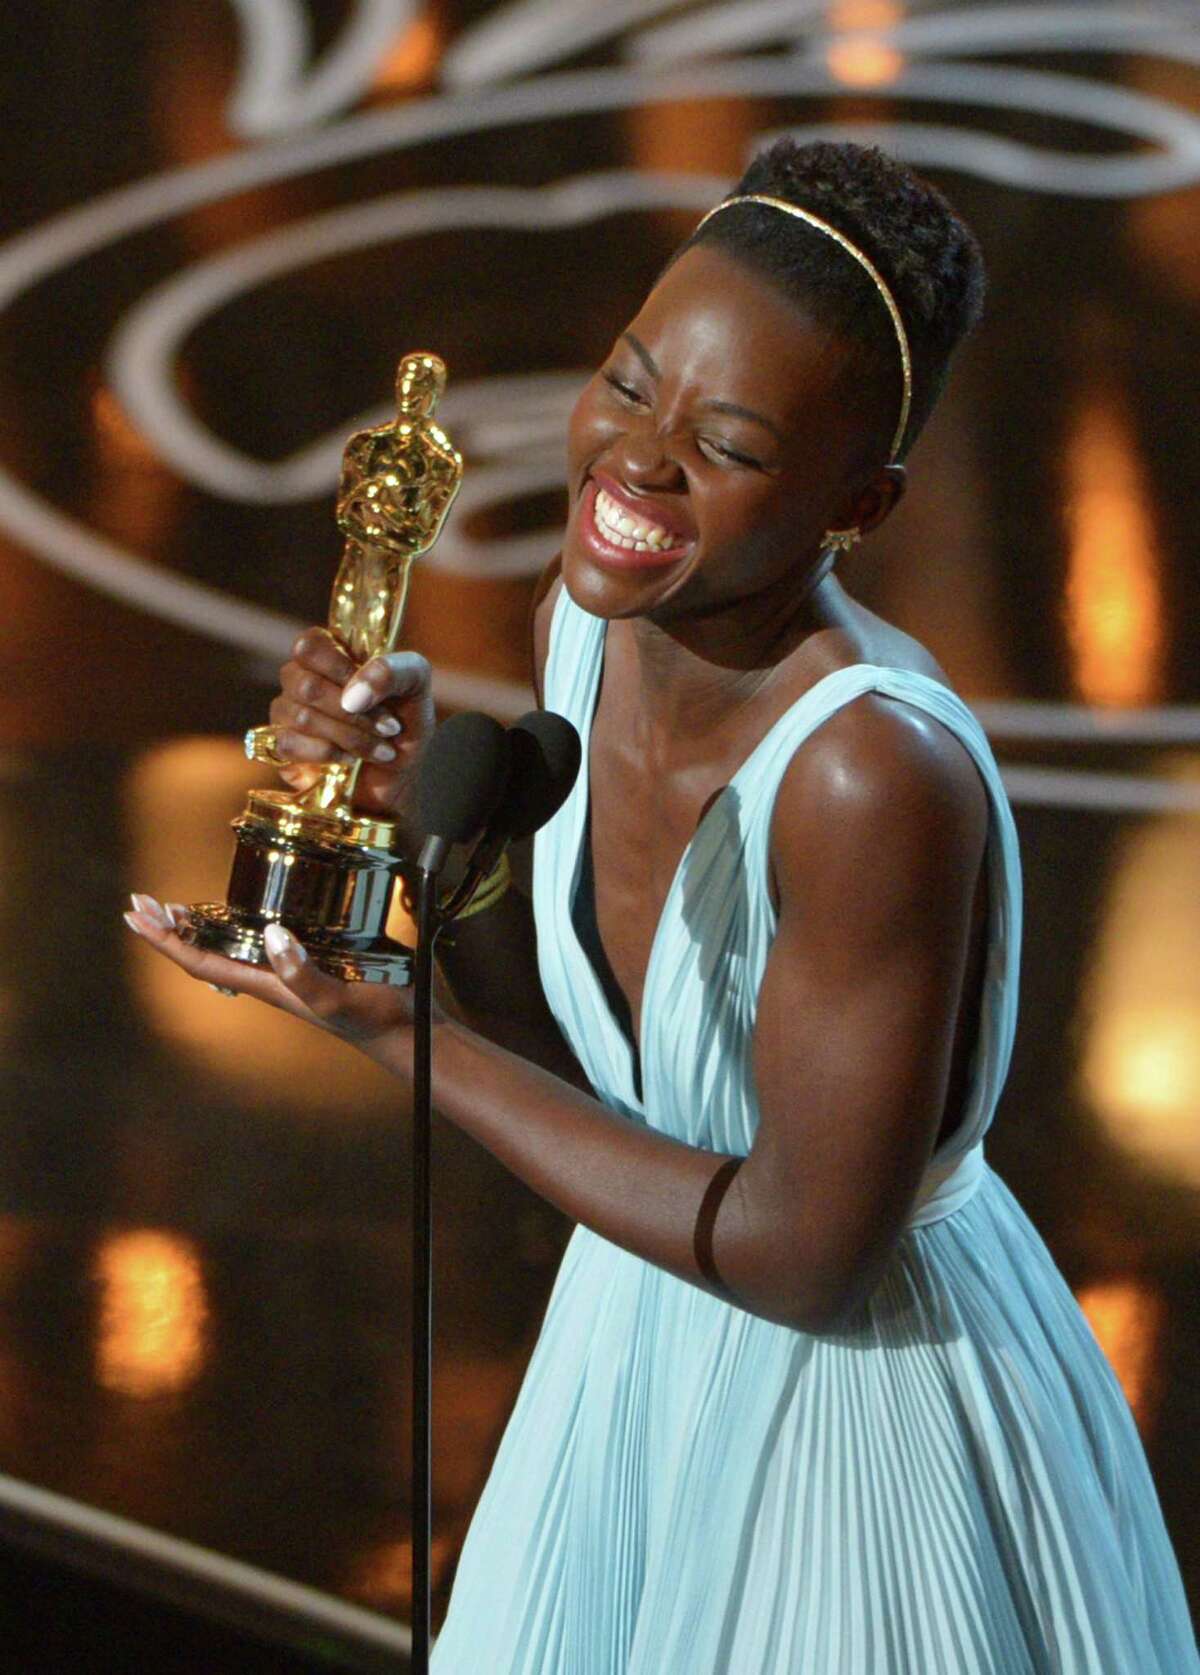 FILE - In this March 2, 2014 file photo, Lupita Nyongío accepts the award for best actress in a supporting role for "12 Years a Slave" during the Oscars in Los Angeles. Nyongío dazzled Hollywood and the Oscar-viewing public through awards season last year. The Mexican-born, Kenyan-raised actress was a central part last year to an Academy Awards flush with faces uncommon to the Oscar podium. There was Ellen DeGeneres, a proud lesbian, hosting. There was the first Latino, Alfonso Cuaron, winning best director. There was the black filmmaker Steve McQueen hopping for joy after his ì12 Years a Slaveî won best picture. (Photo by John Shearer/Invision/AP, File)